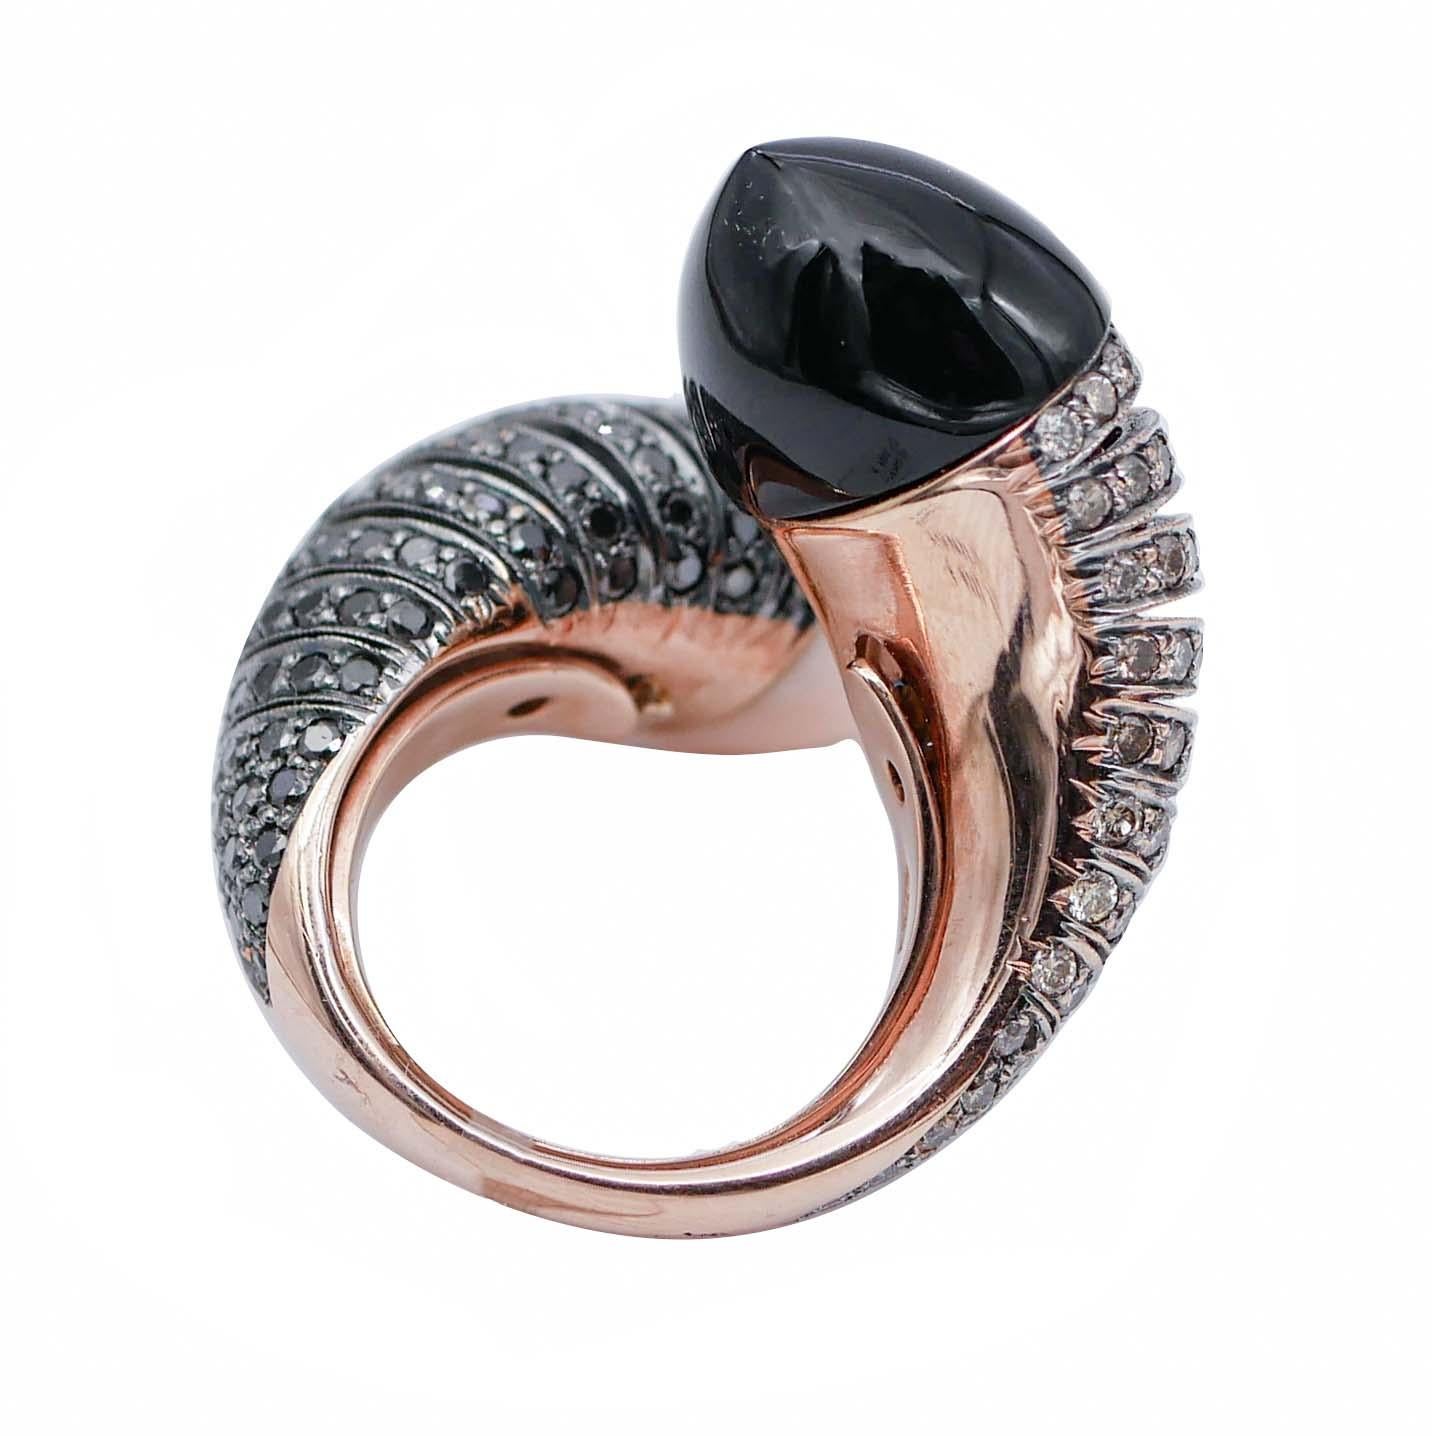 Mixed Cut Coral, Onyx, Diamonds, 18 Karat White and Rose Gold Ring For Sale